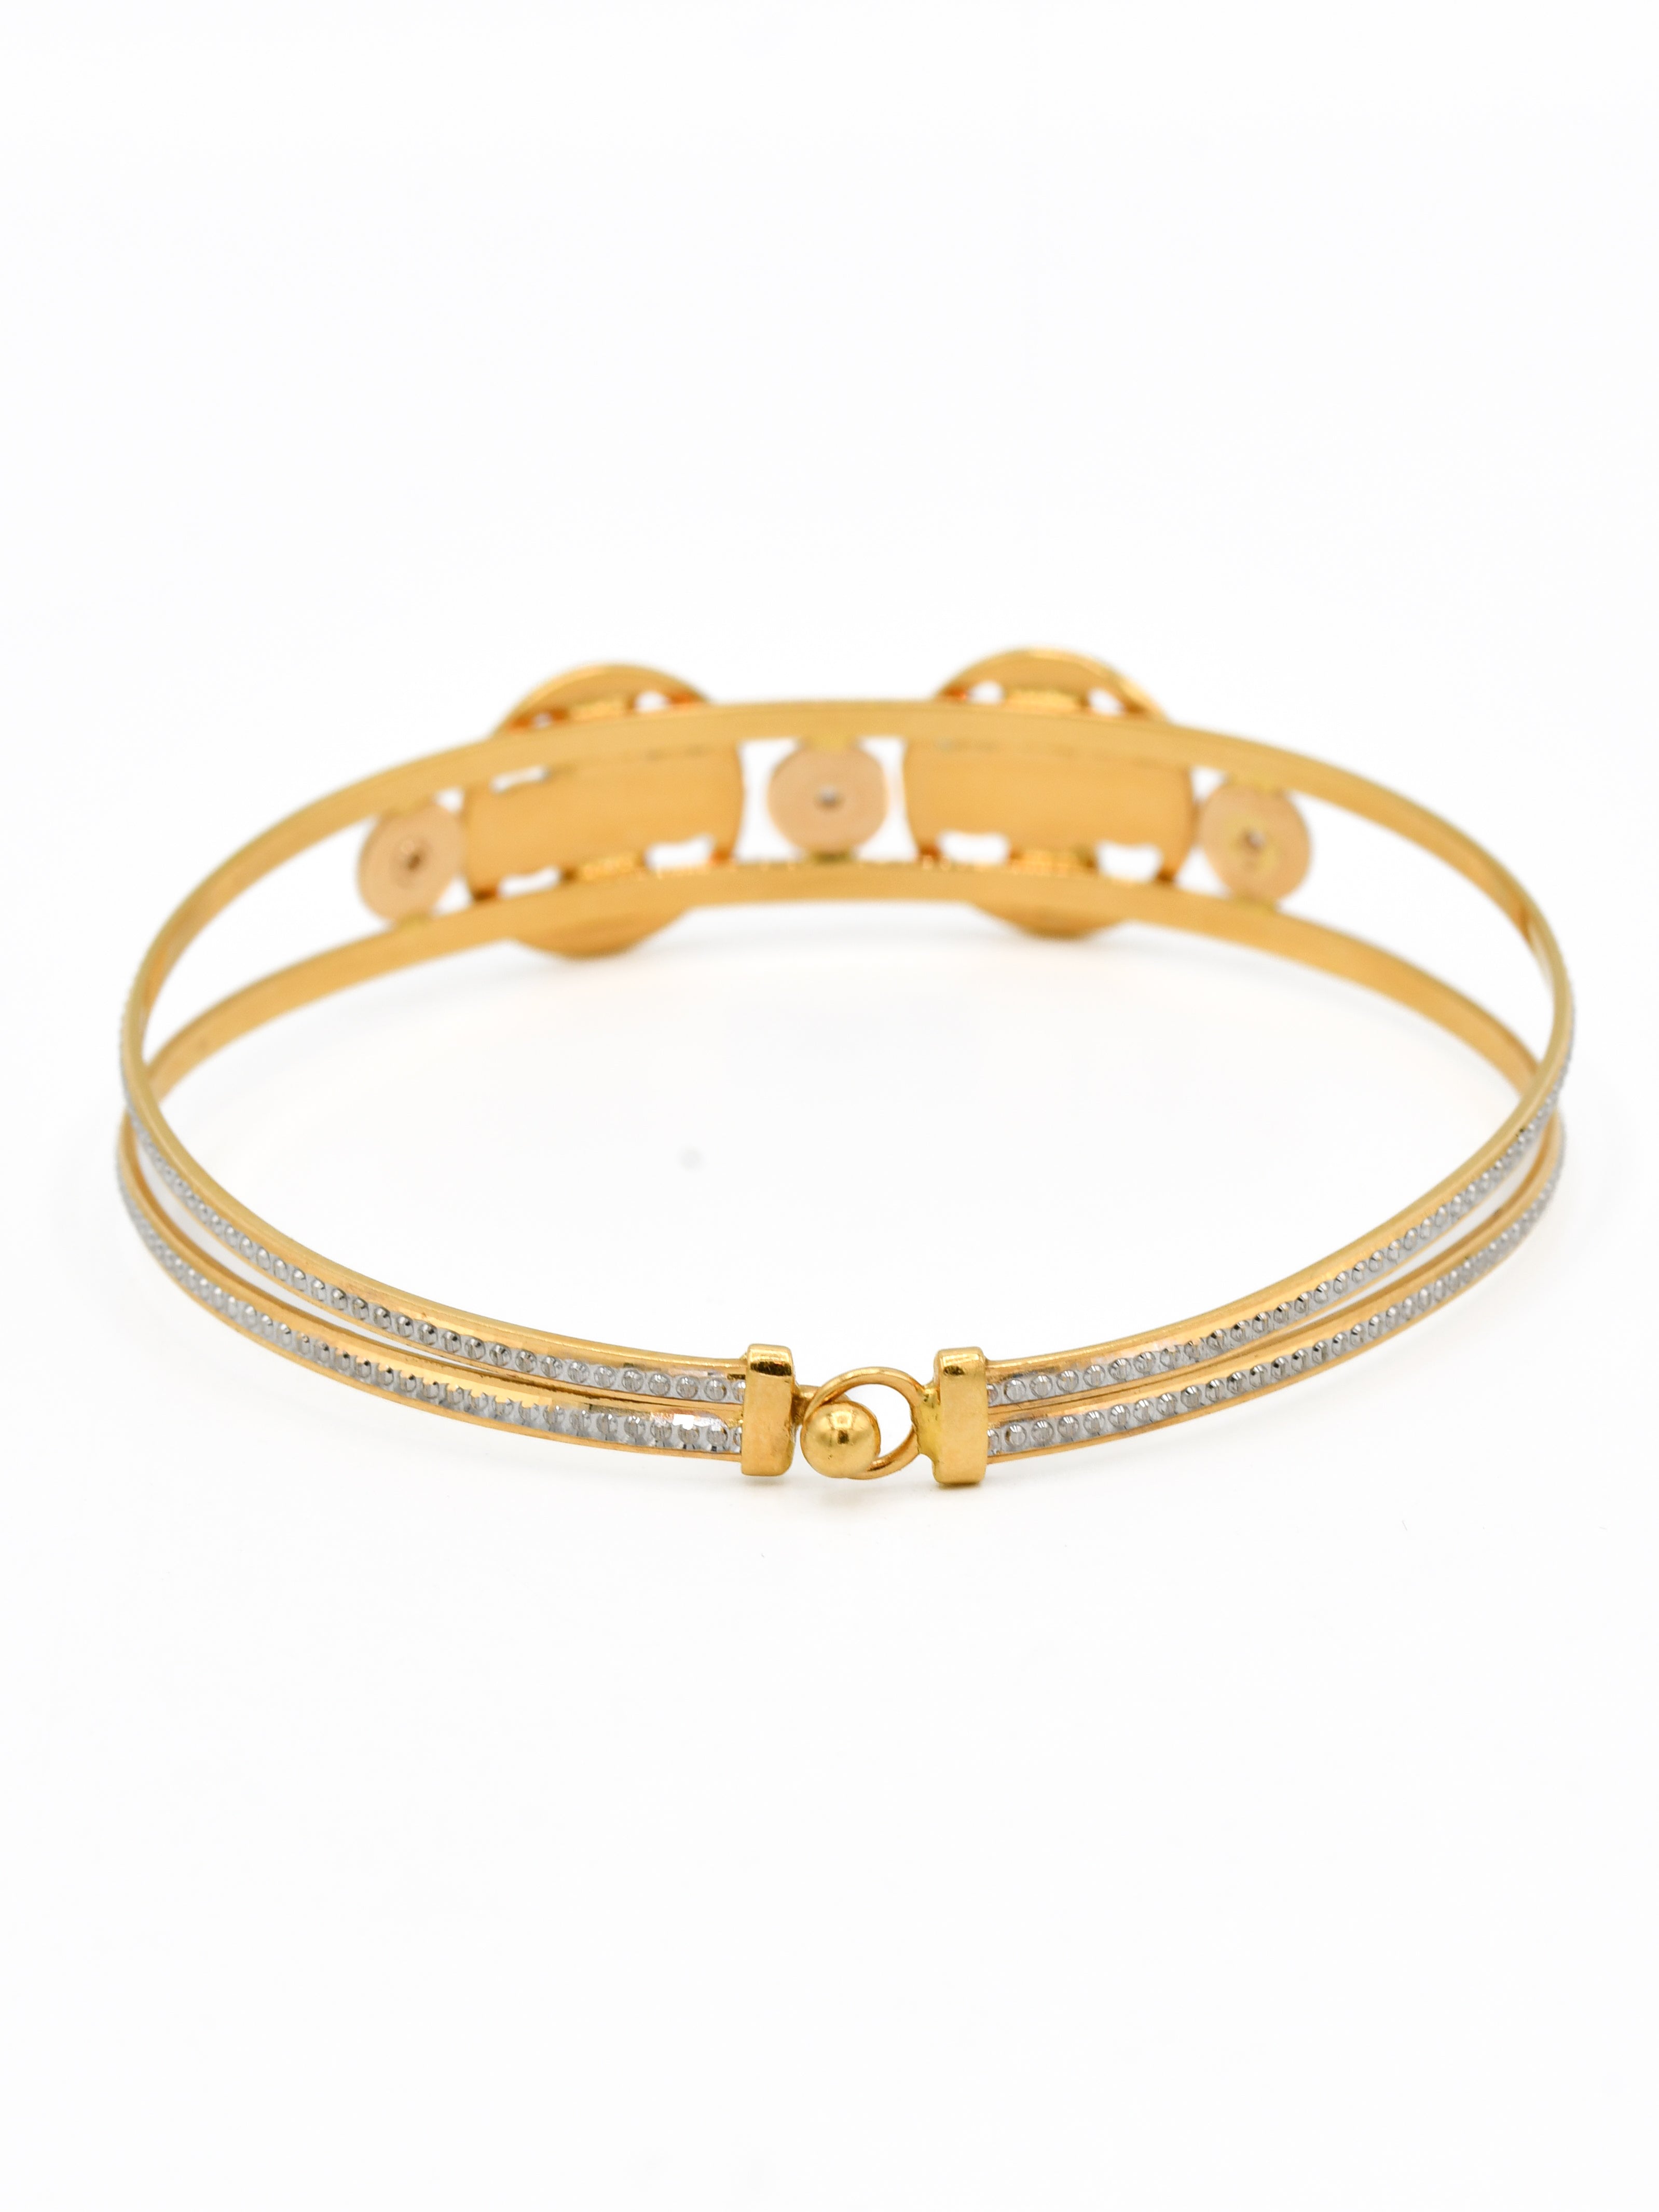 22ct Gold Two Tone Bangle - Roop Darshan